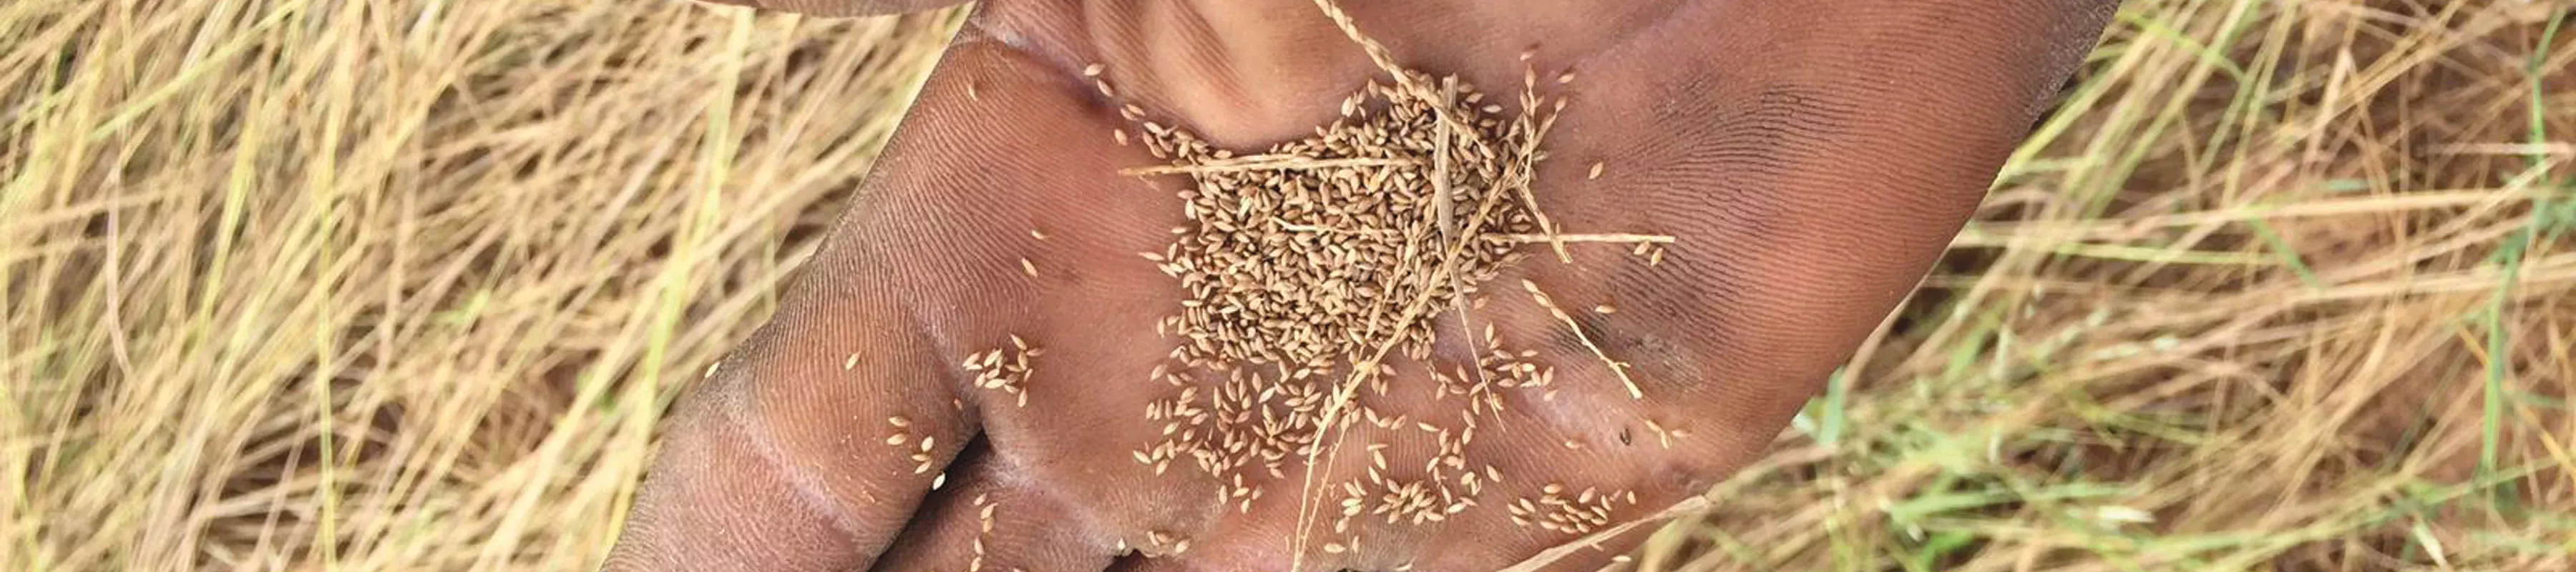 An open hand with small grains of Digitalis exilis 